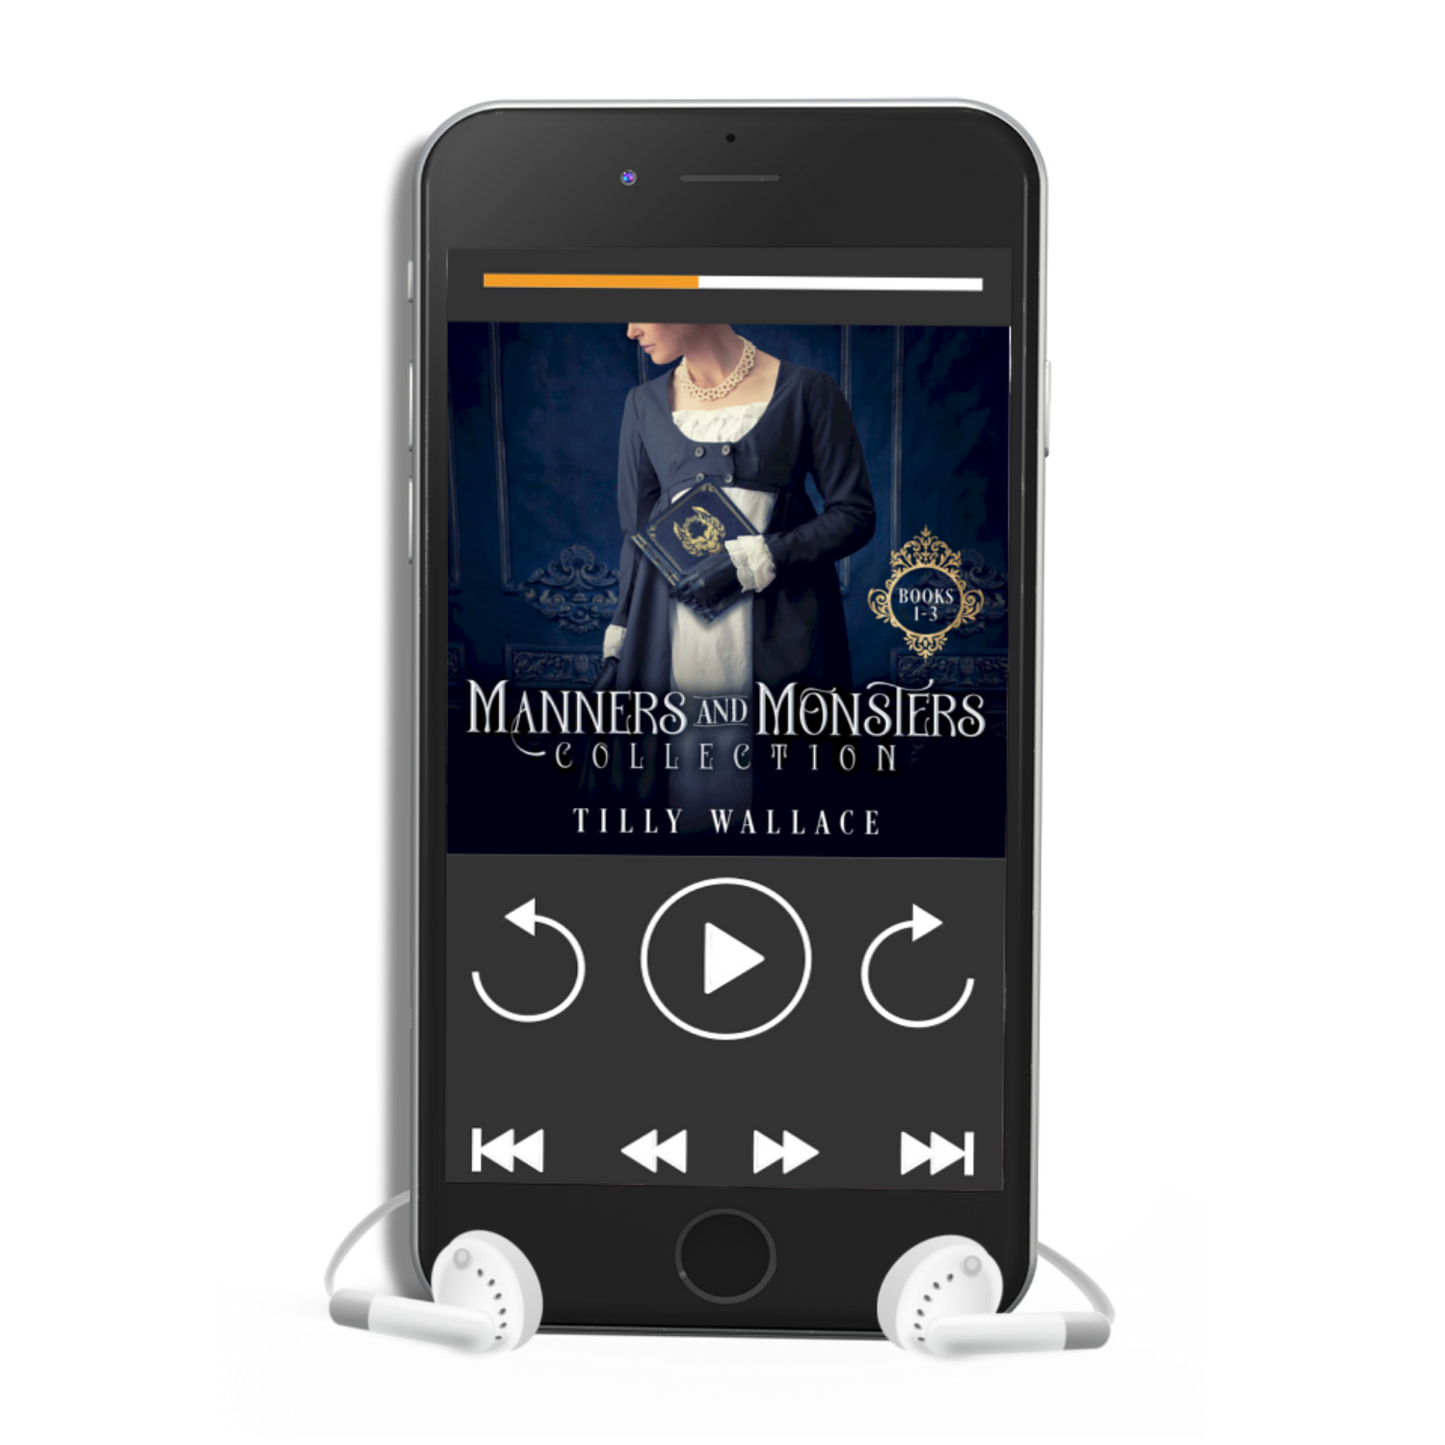 Manners and Monsters Collection (audio)